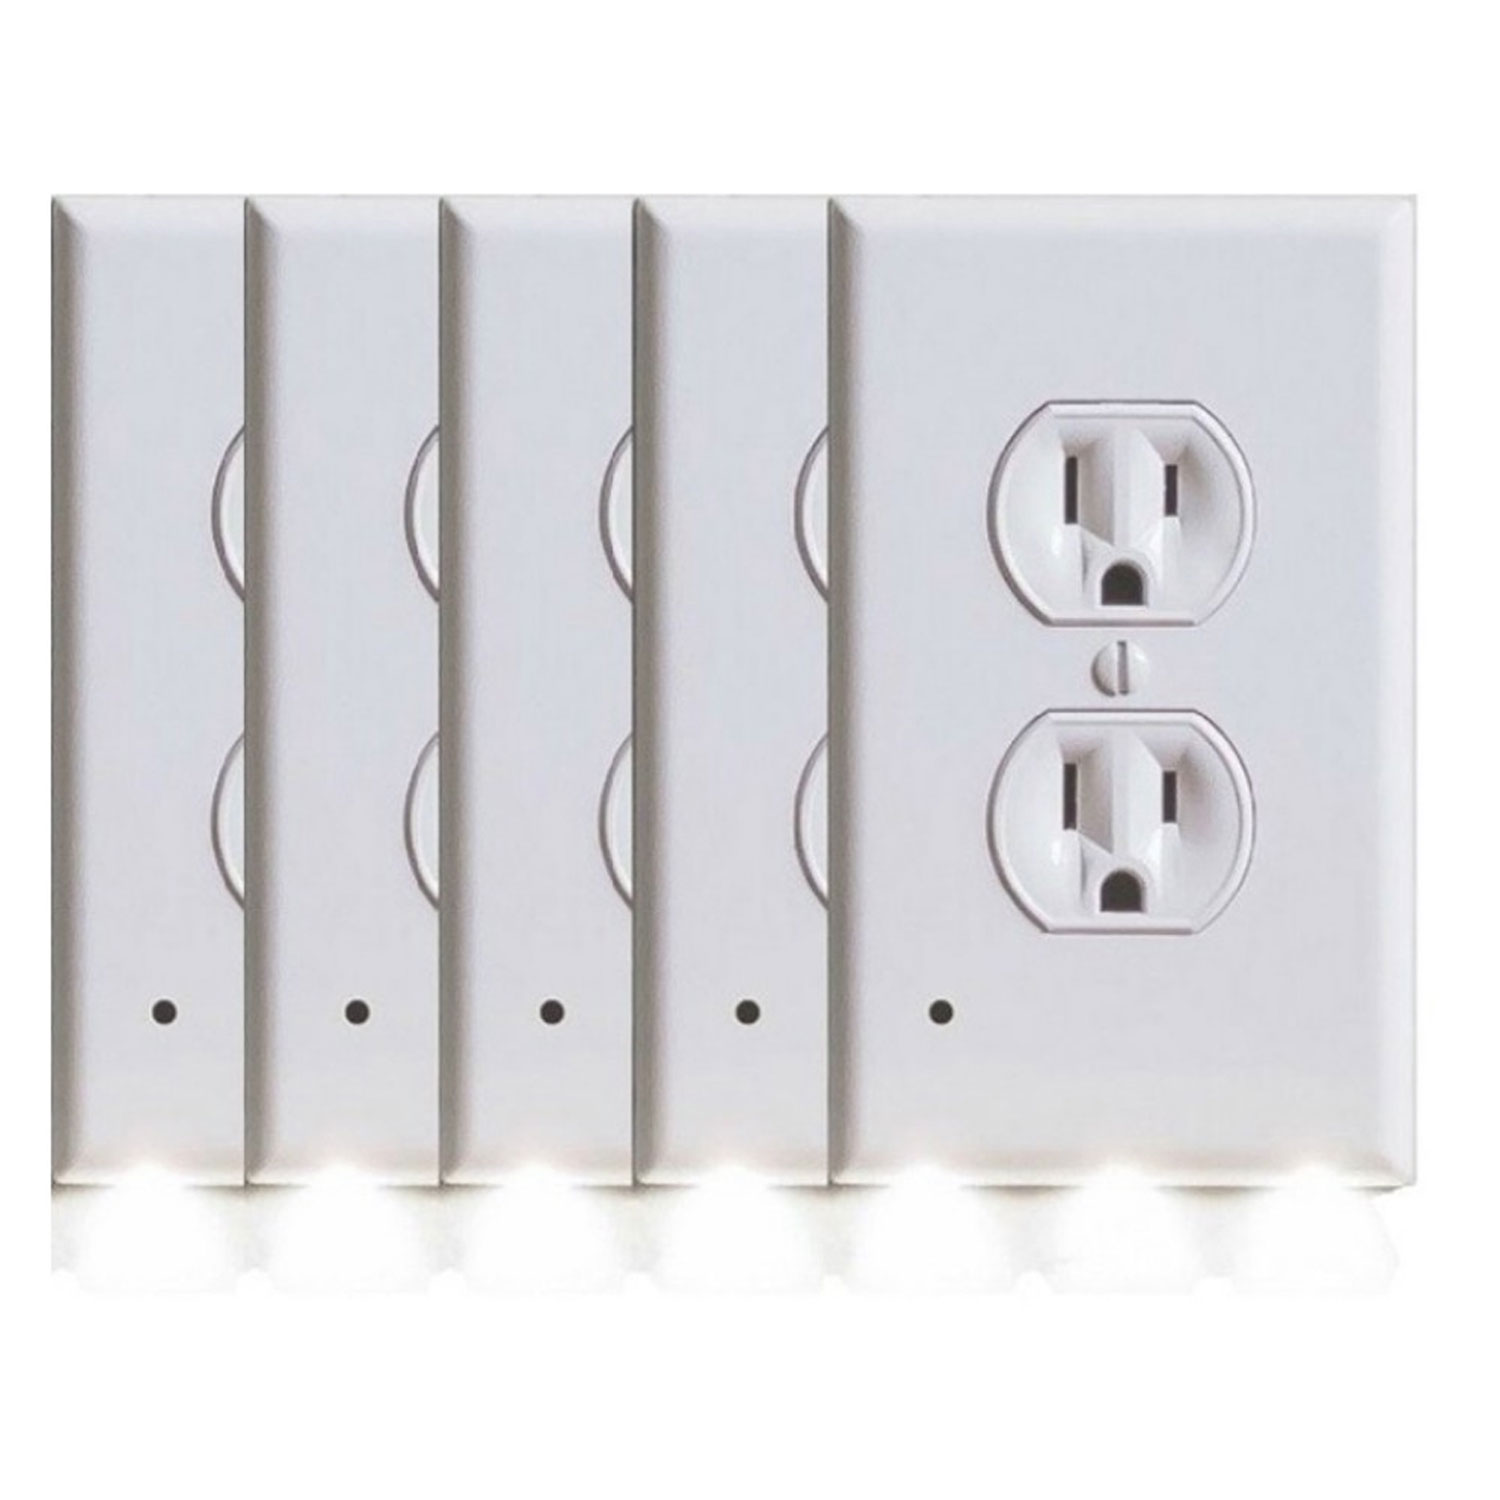 5-Pack Outlet Covers with Built-In LED Night Lights